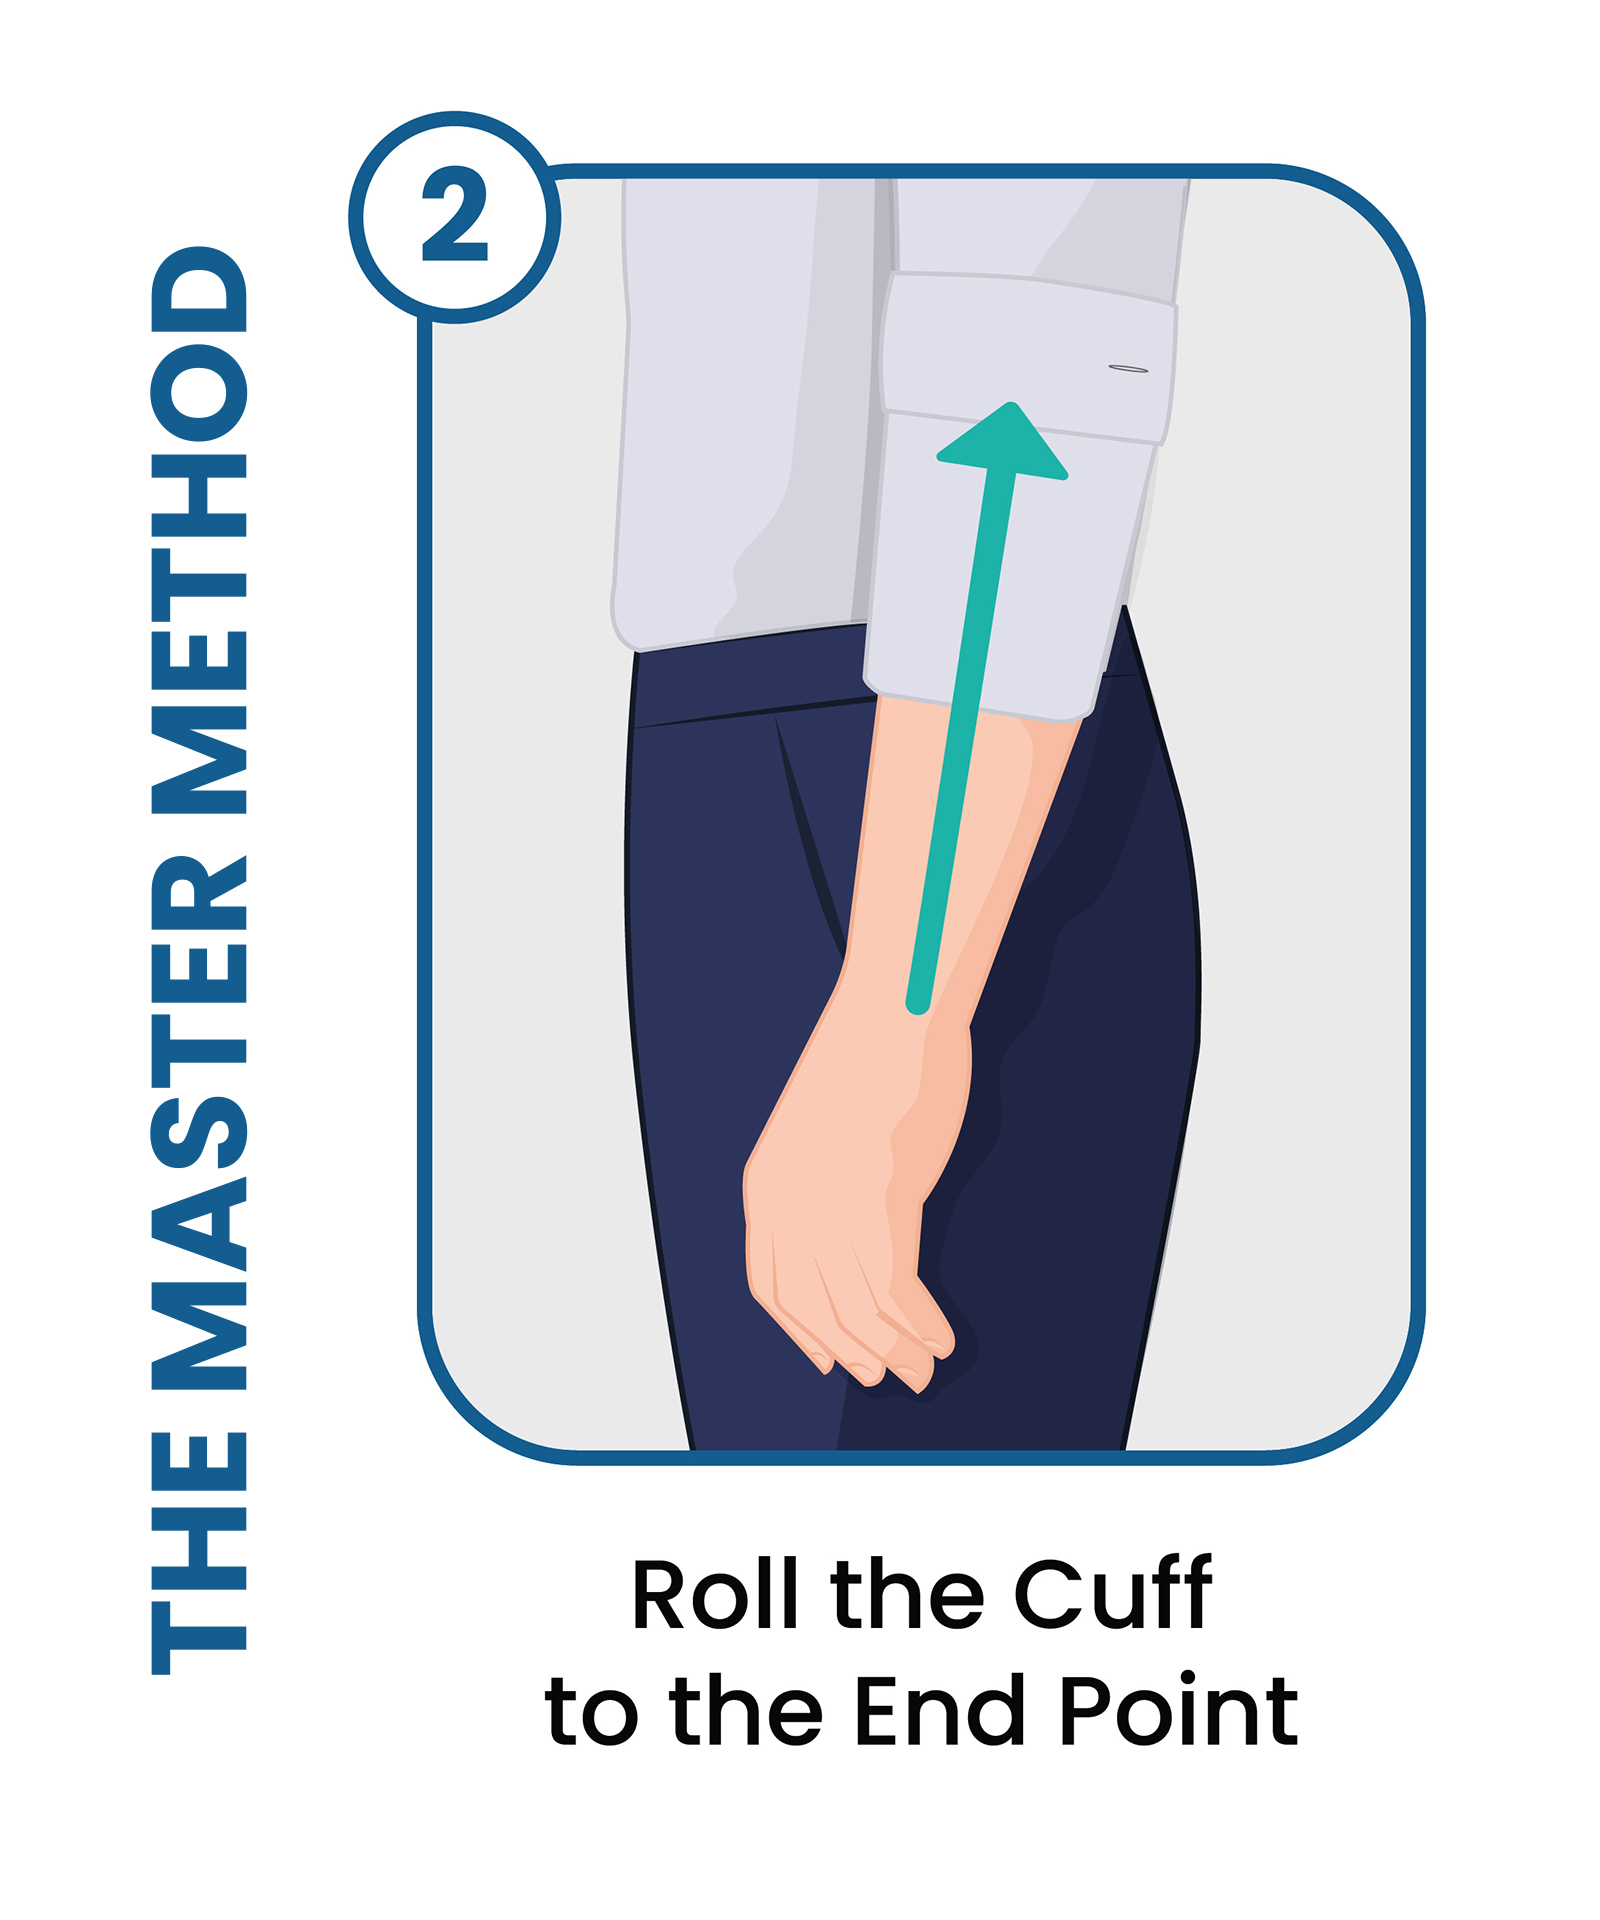 the master method: step 2 is to roll the cuff to the end point